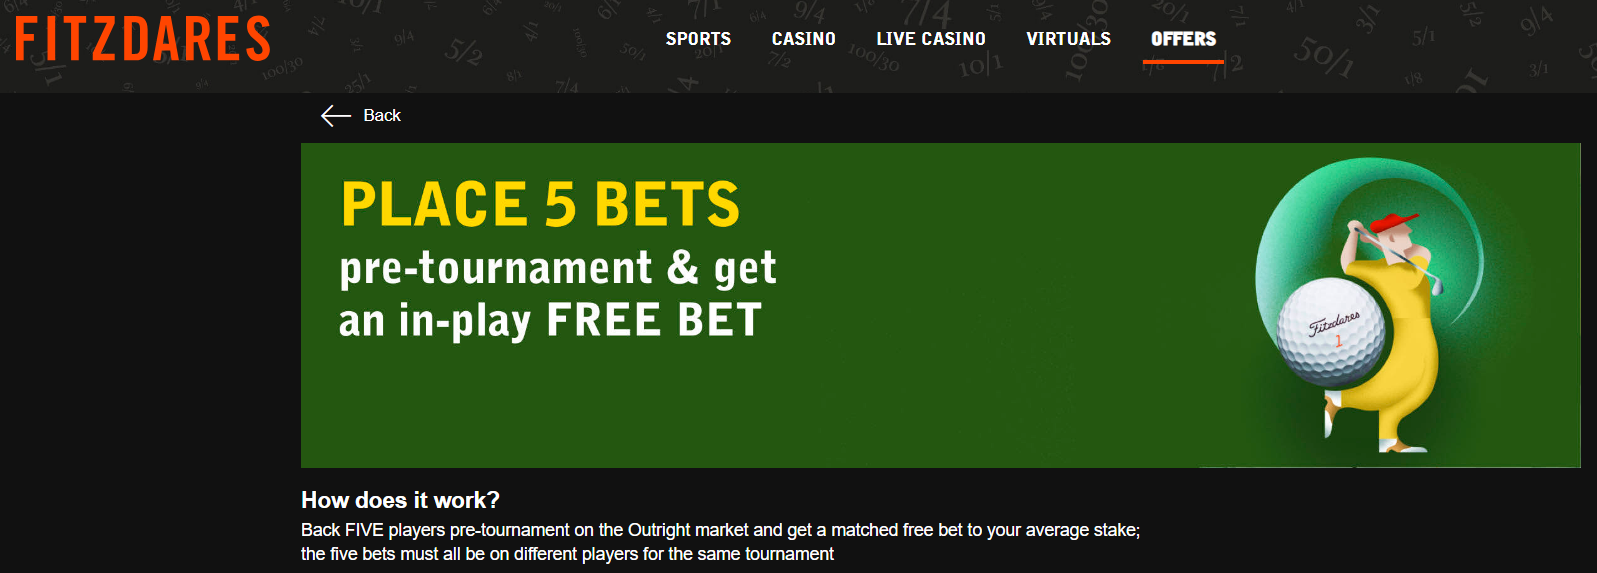 Fitzdares golf betting Free bet offer